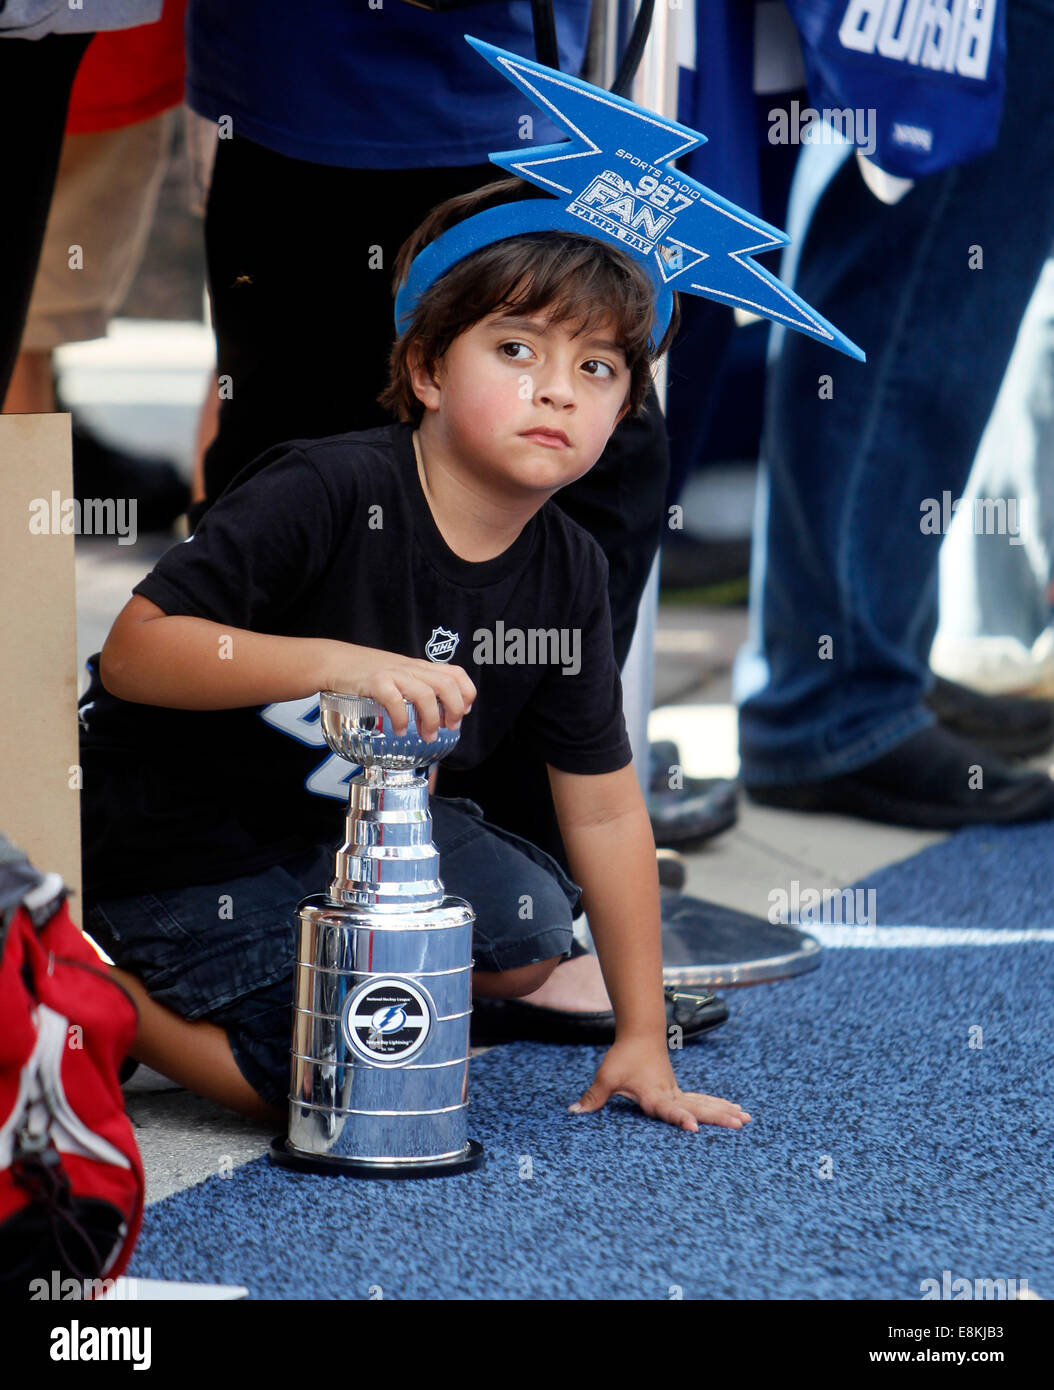 Tampa, Florida, USA. 9th October, 2014. Tampa Bay Lightning fan Lukas Kott, 5, from Tampa, clutches his miniature Stanley Cup while waiting for Lightning players to arrive on the ''blue carpet'' before taking on the Florida Panthers on opening night at the Amalie Arena in Tampa Thursday evening (10/6/14). HIs favorite player is Steven Stamkos, his older sister Brittanty Kott said. ''He's obsessed, he wants to be like him. © ZUMA Press, Inc/Alamy Live News © ZUMA Press, Inc/Alamy Live News Stock Photo